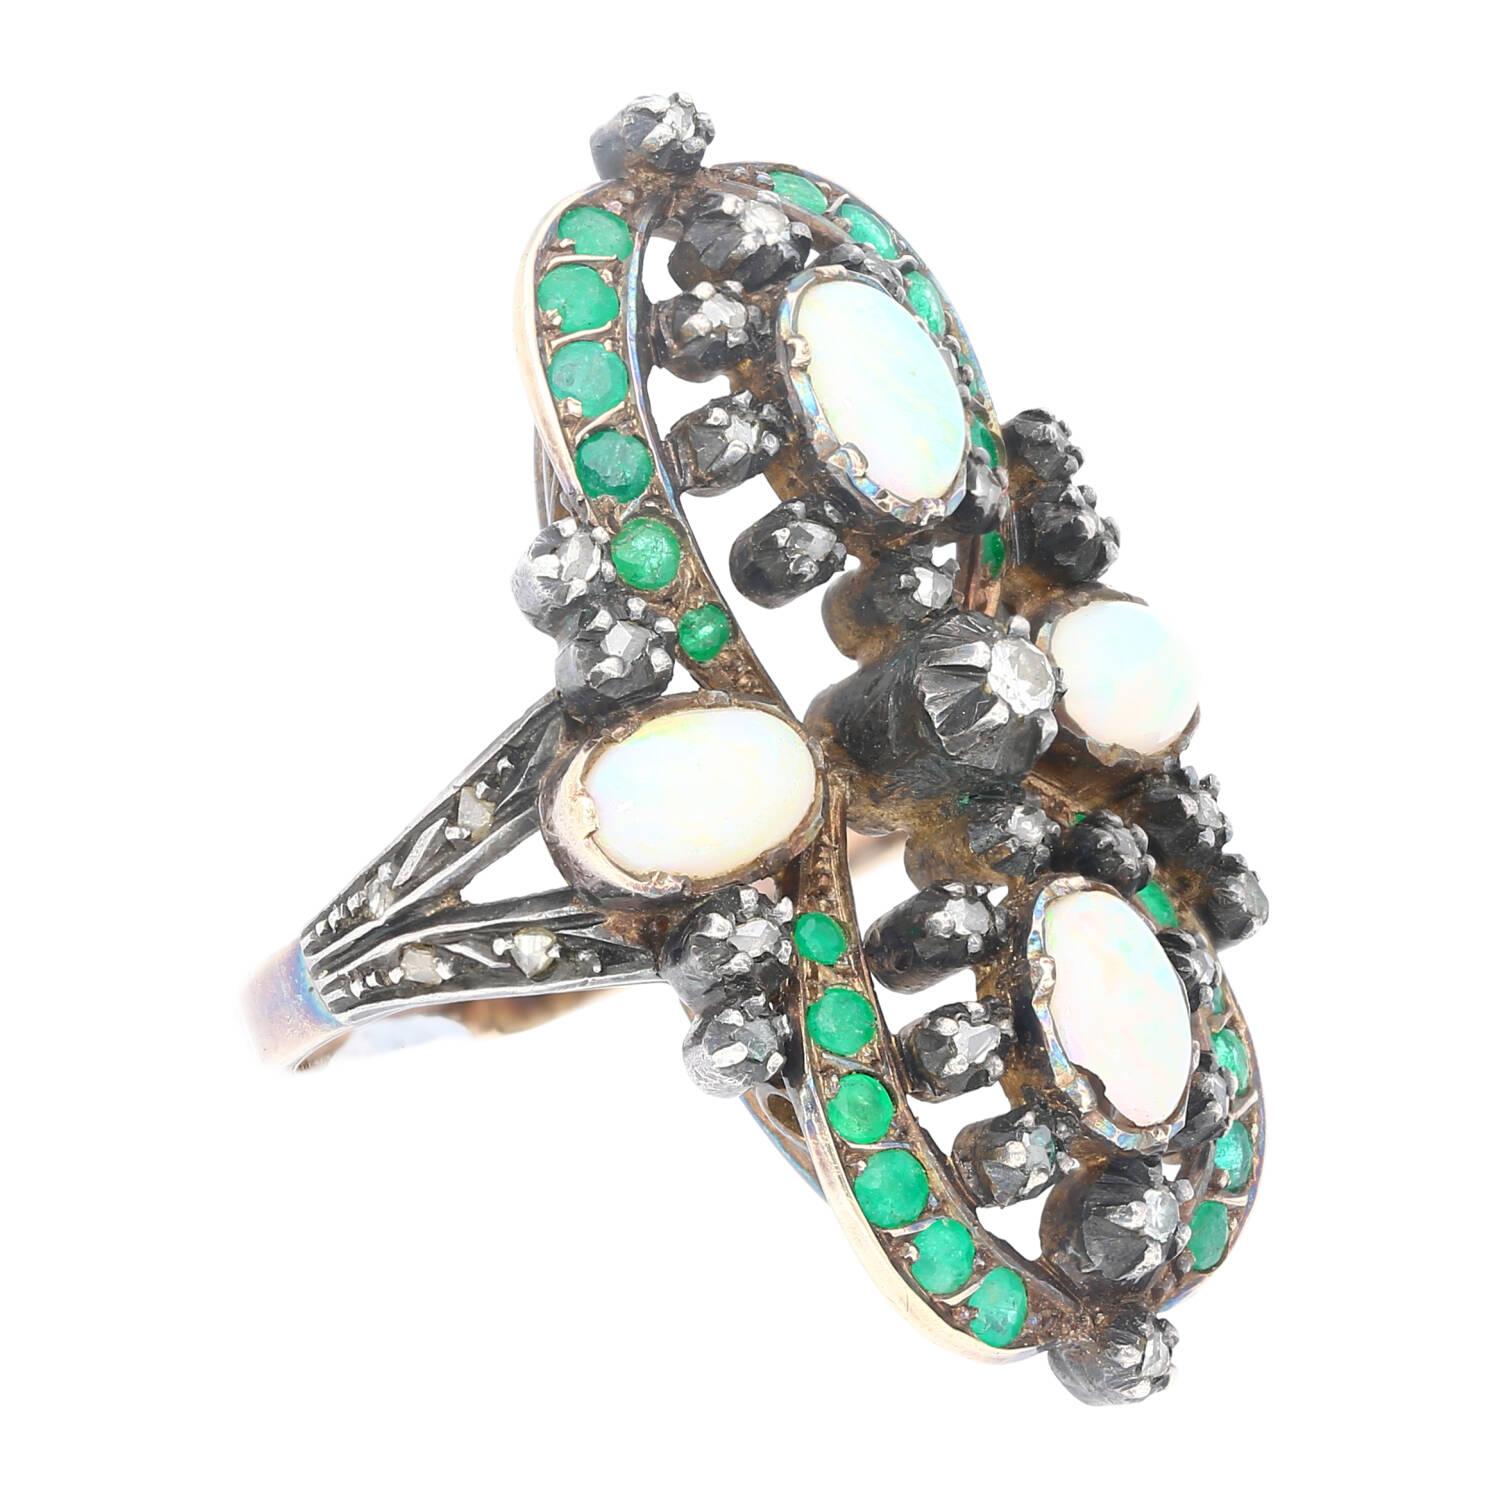 Antique Victorian Era 1800s Opal, Emerald, and Diamond Ring in Gold and Silver In Good Condition For Sale In Miami, FL